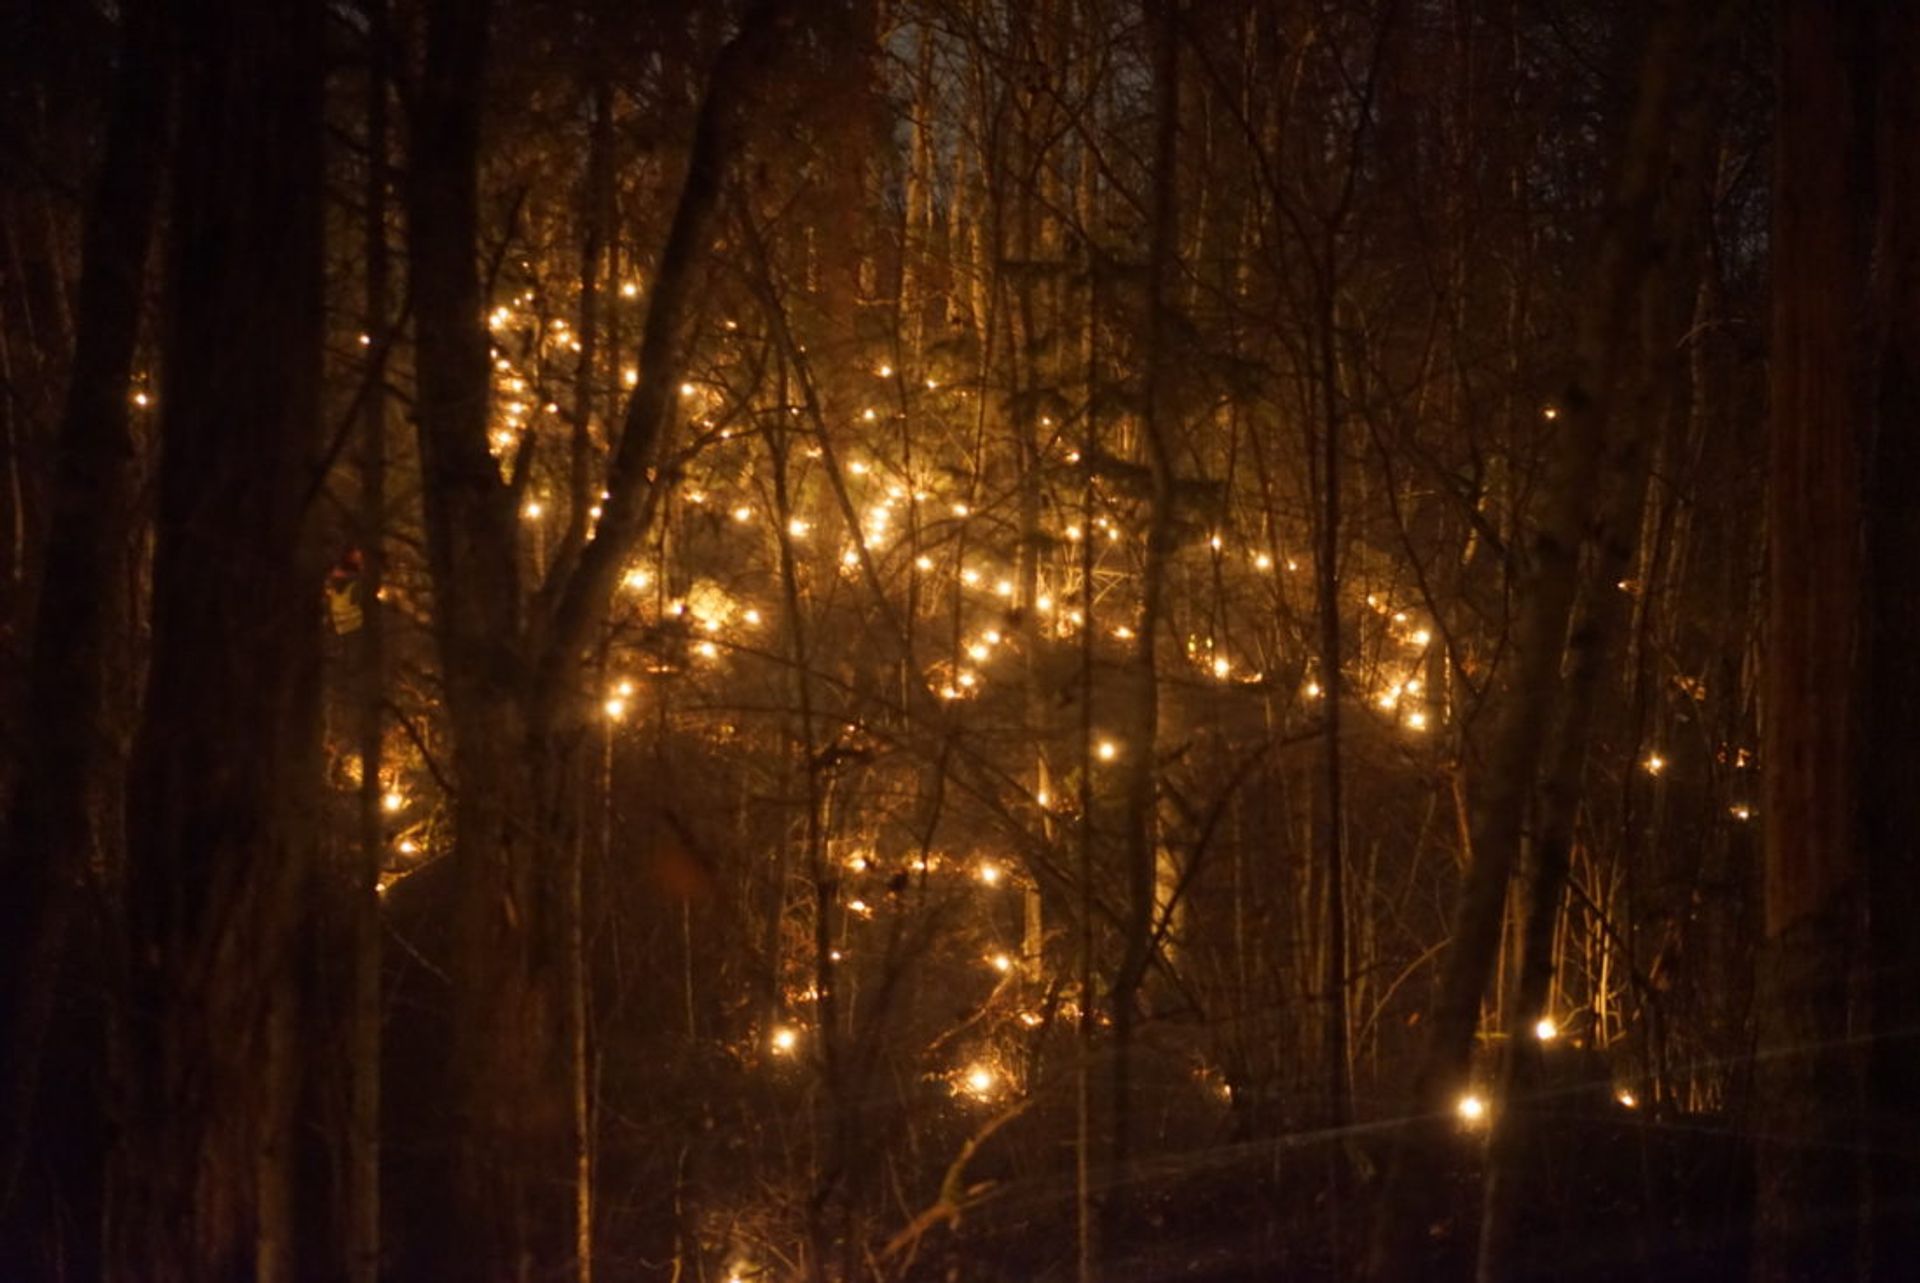 Lights in a forest.